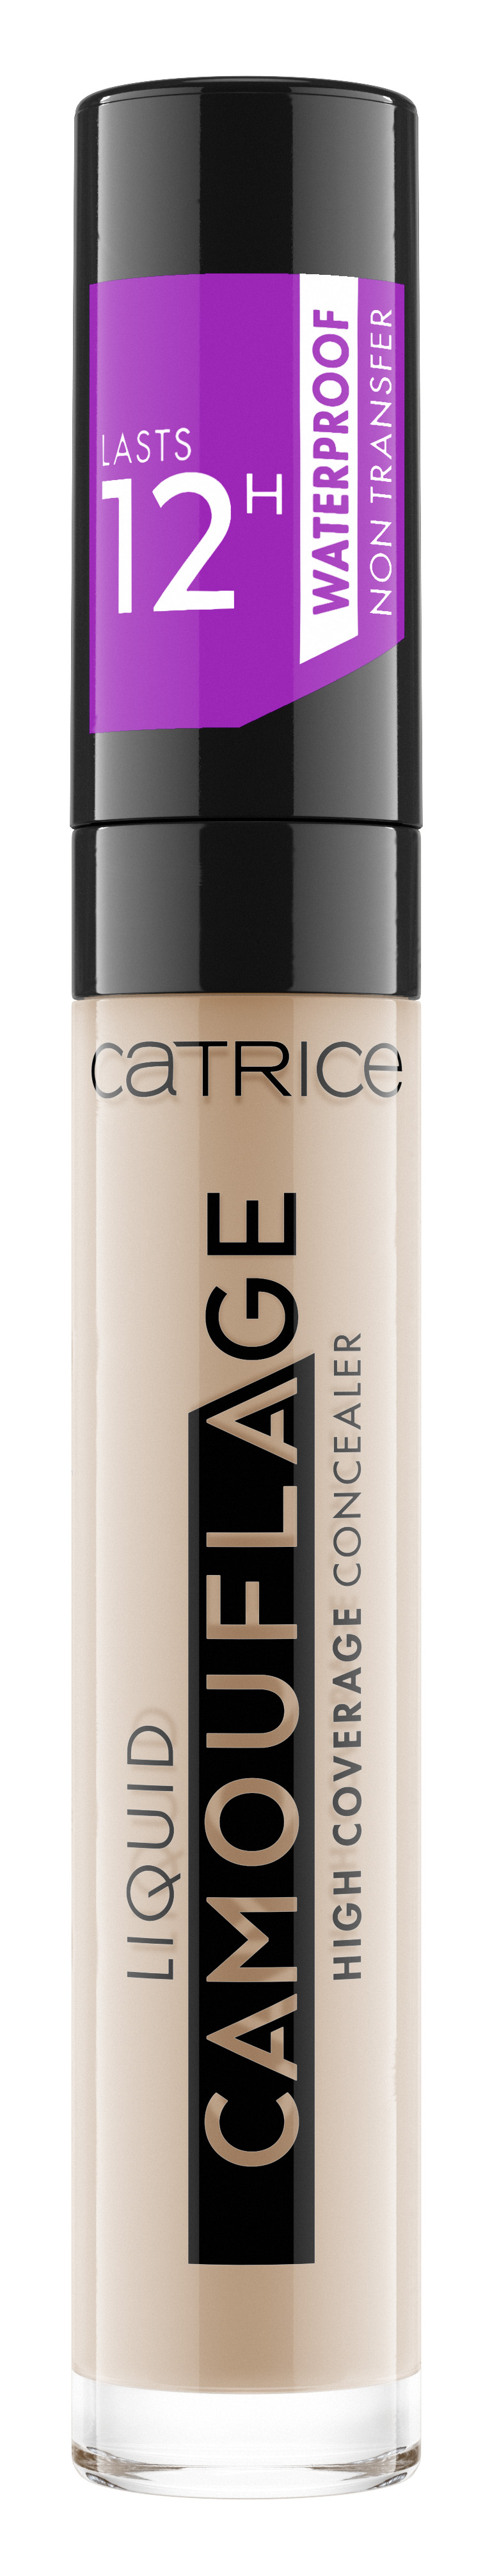 Консилер для лица CATRICE Liquid Camouflage - High Coverage Concealer 020 Light Beige консилер для маскировки пор the saem mineralizing pore concealer 1 5 natural beige 4 мл